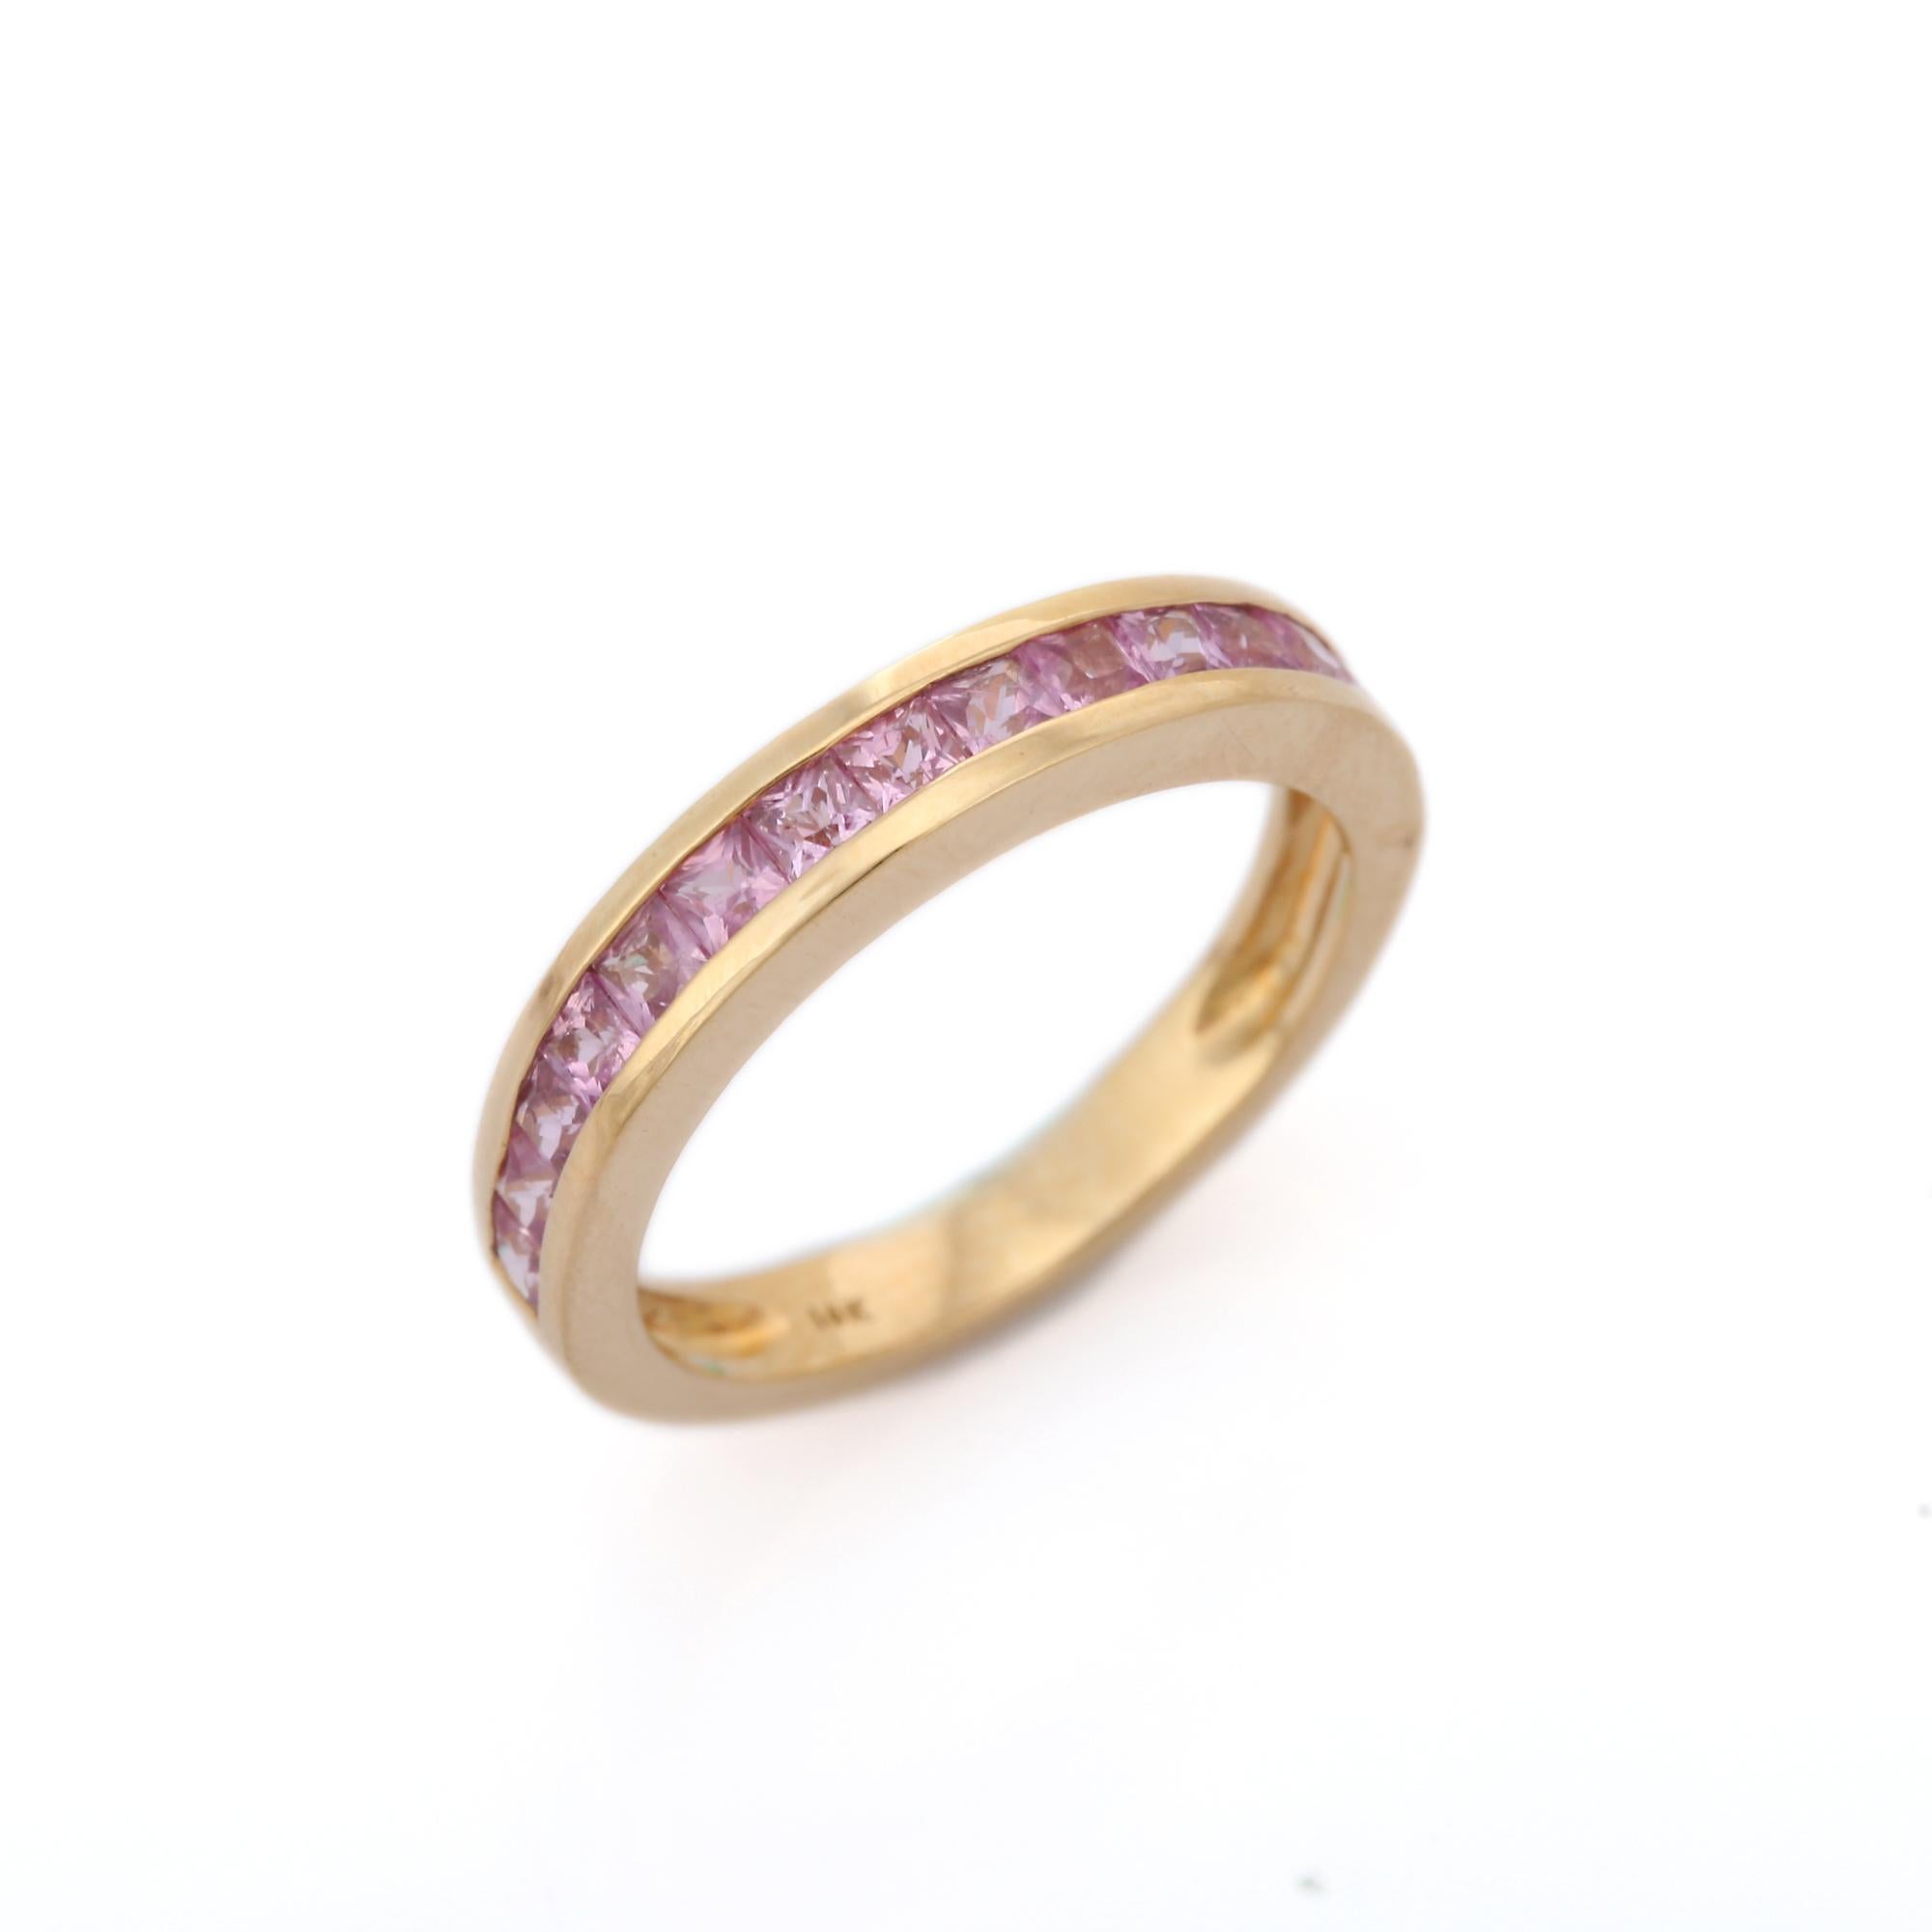 For Sale:  Natural Pink Sapphire Half Eternity Band Ring in 14K Yellow Gold 7